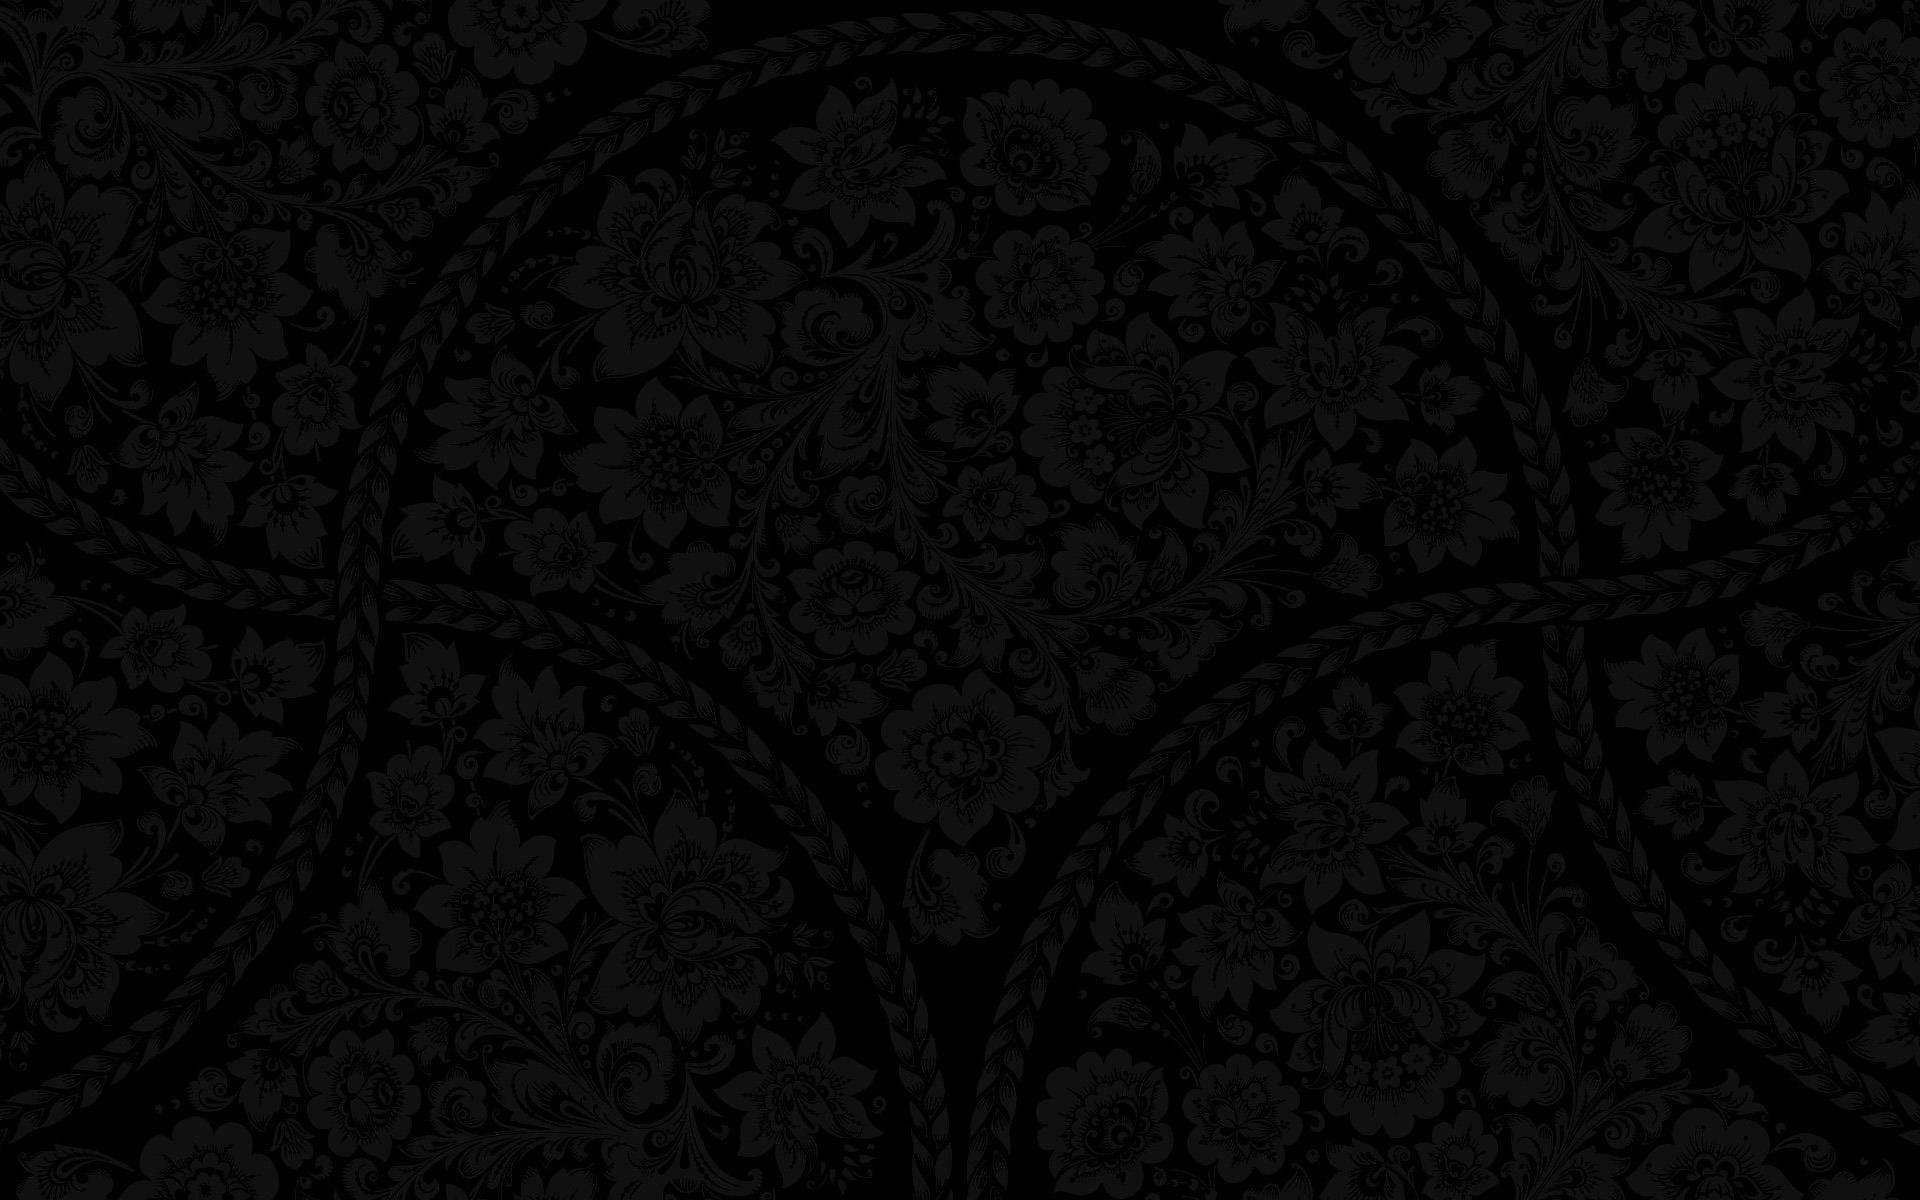 Retro Floral Aesthetic Black Pattern Background